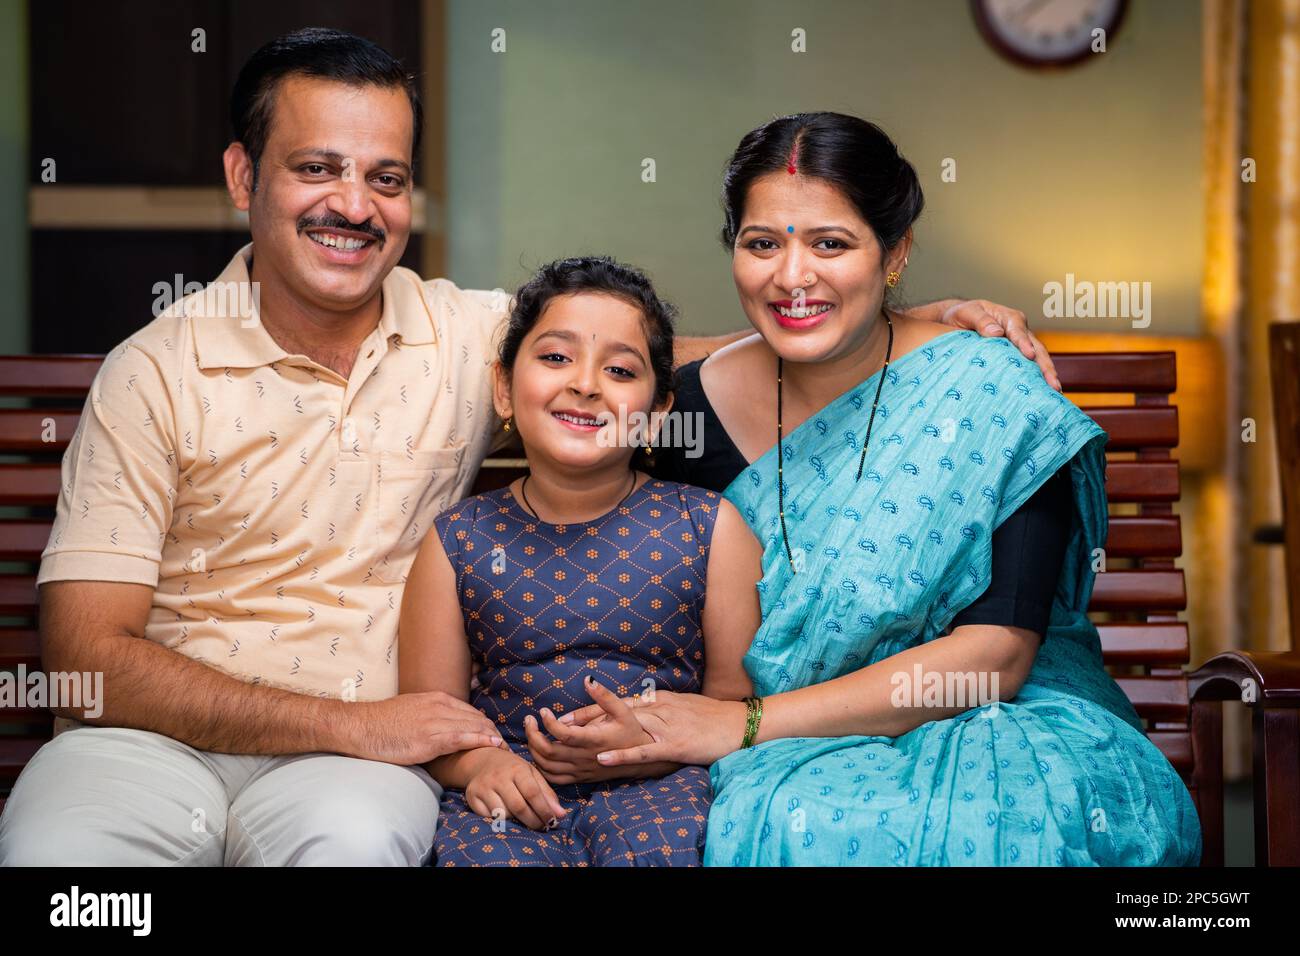 Happy smiling couple with daughter looking camera while sitting on sofa at home - concept of relationship, family photo posing and togetherness Stock Photo